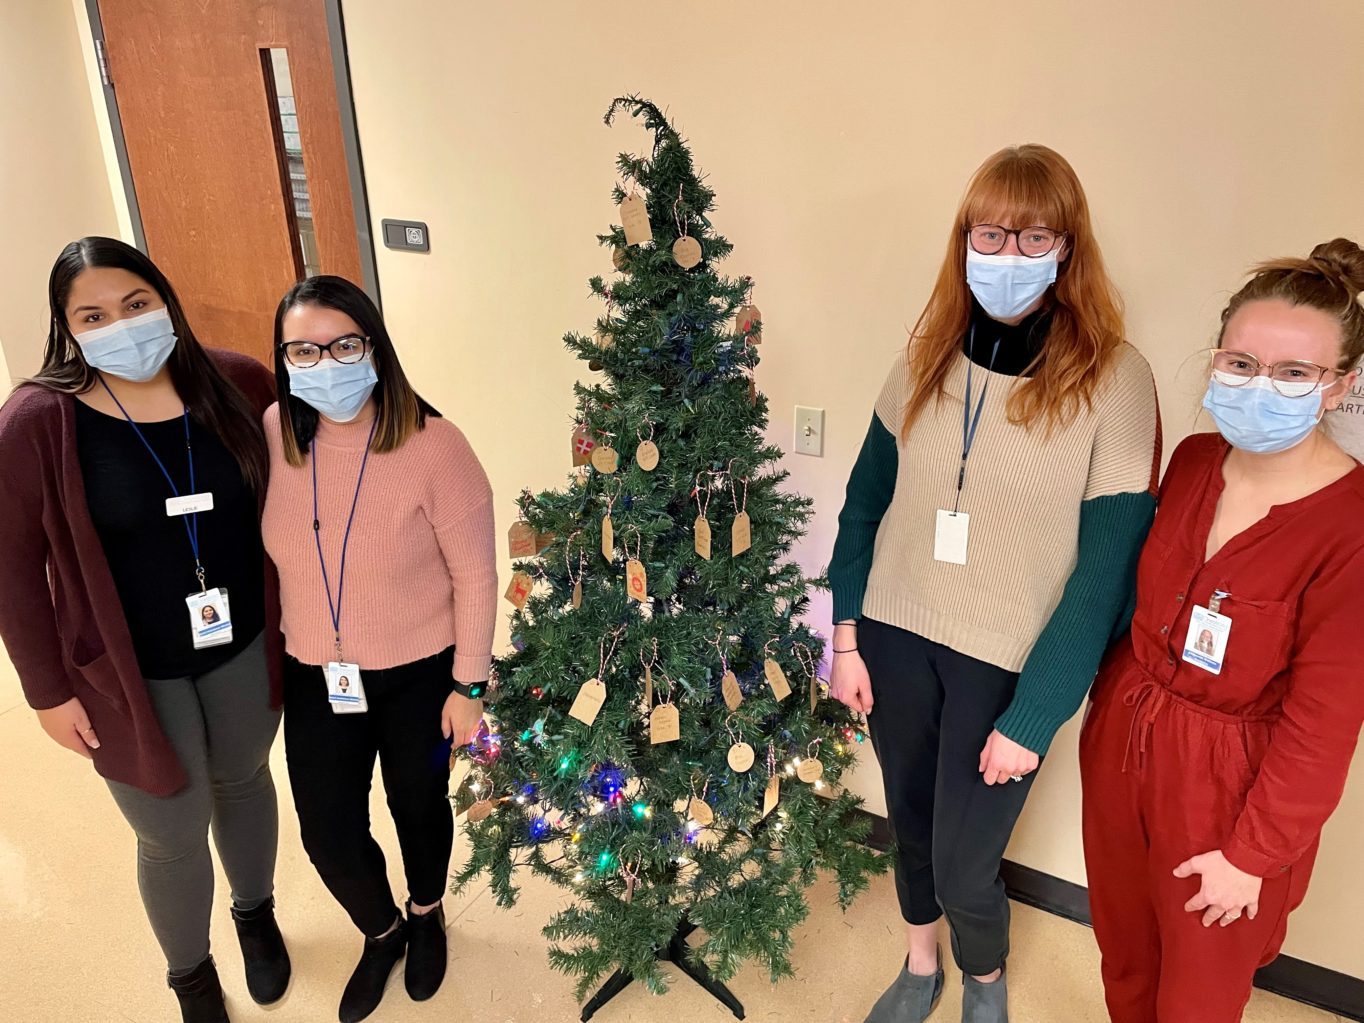 Members of the social work team around the holiday tree.